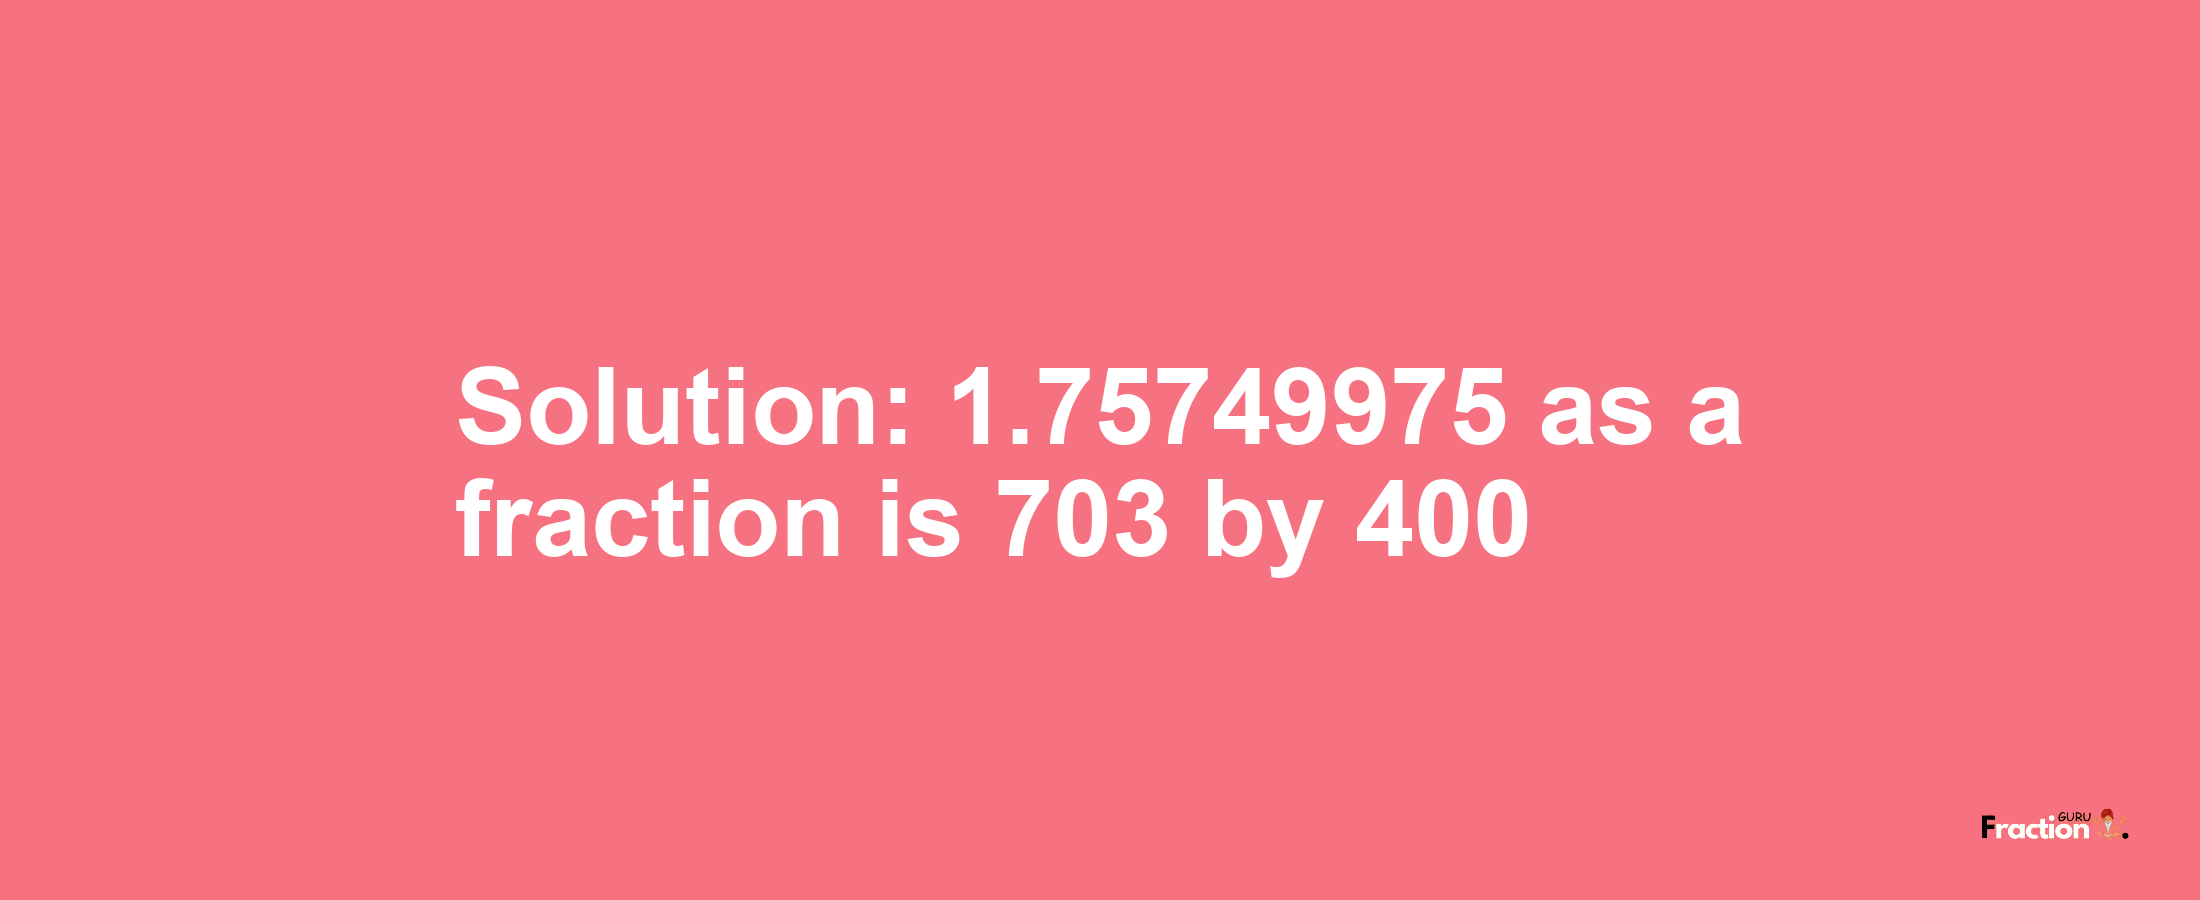 Solution:1.75749975 as a fraction is 703/400